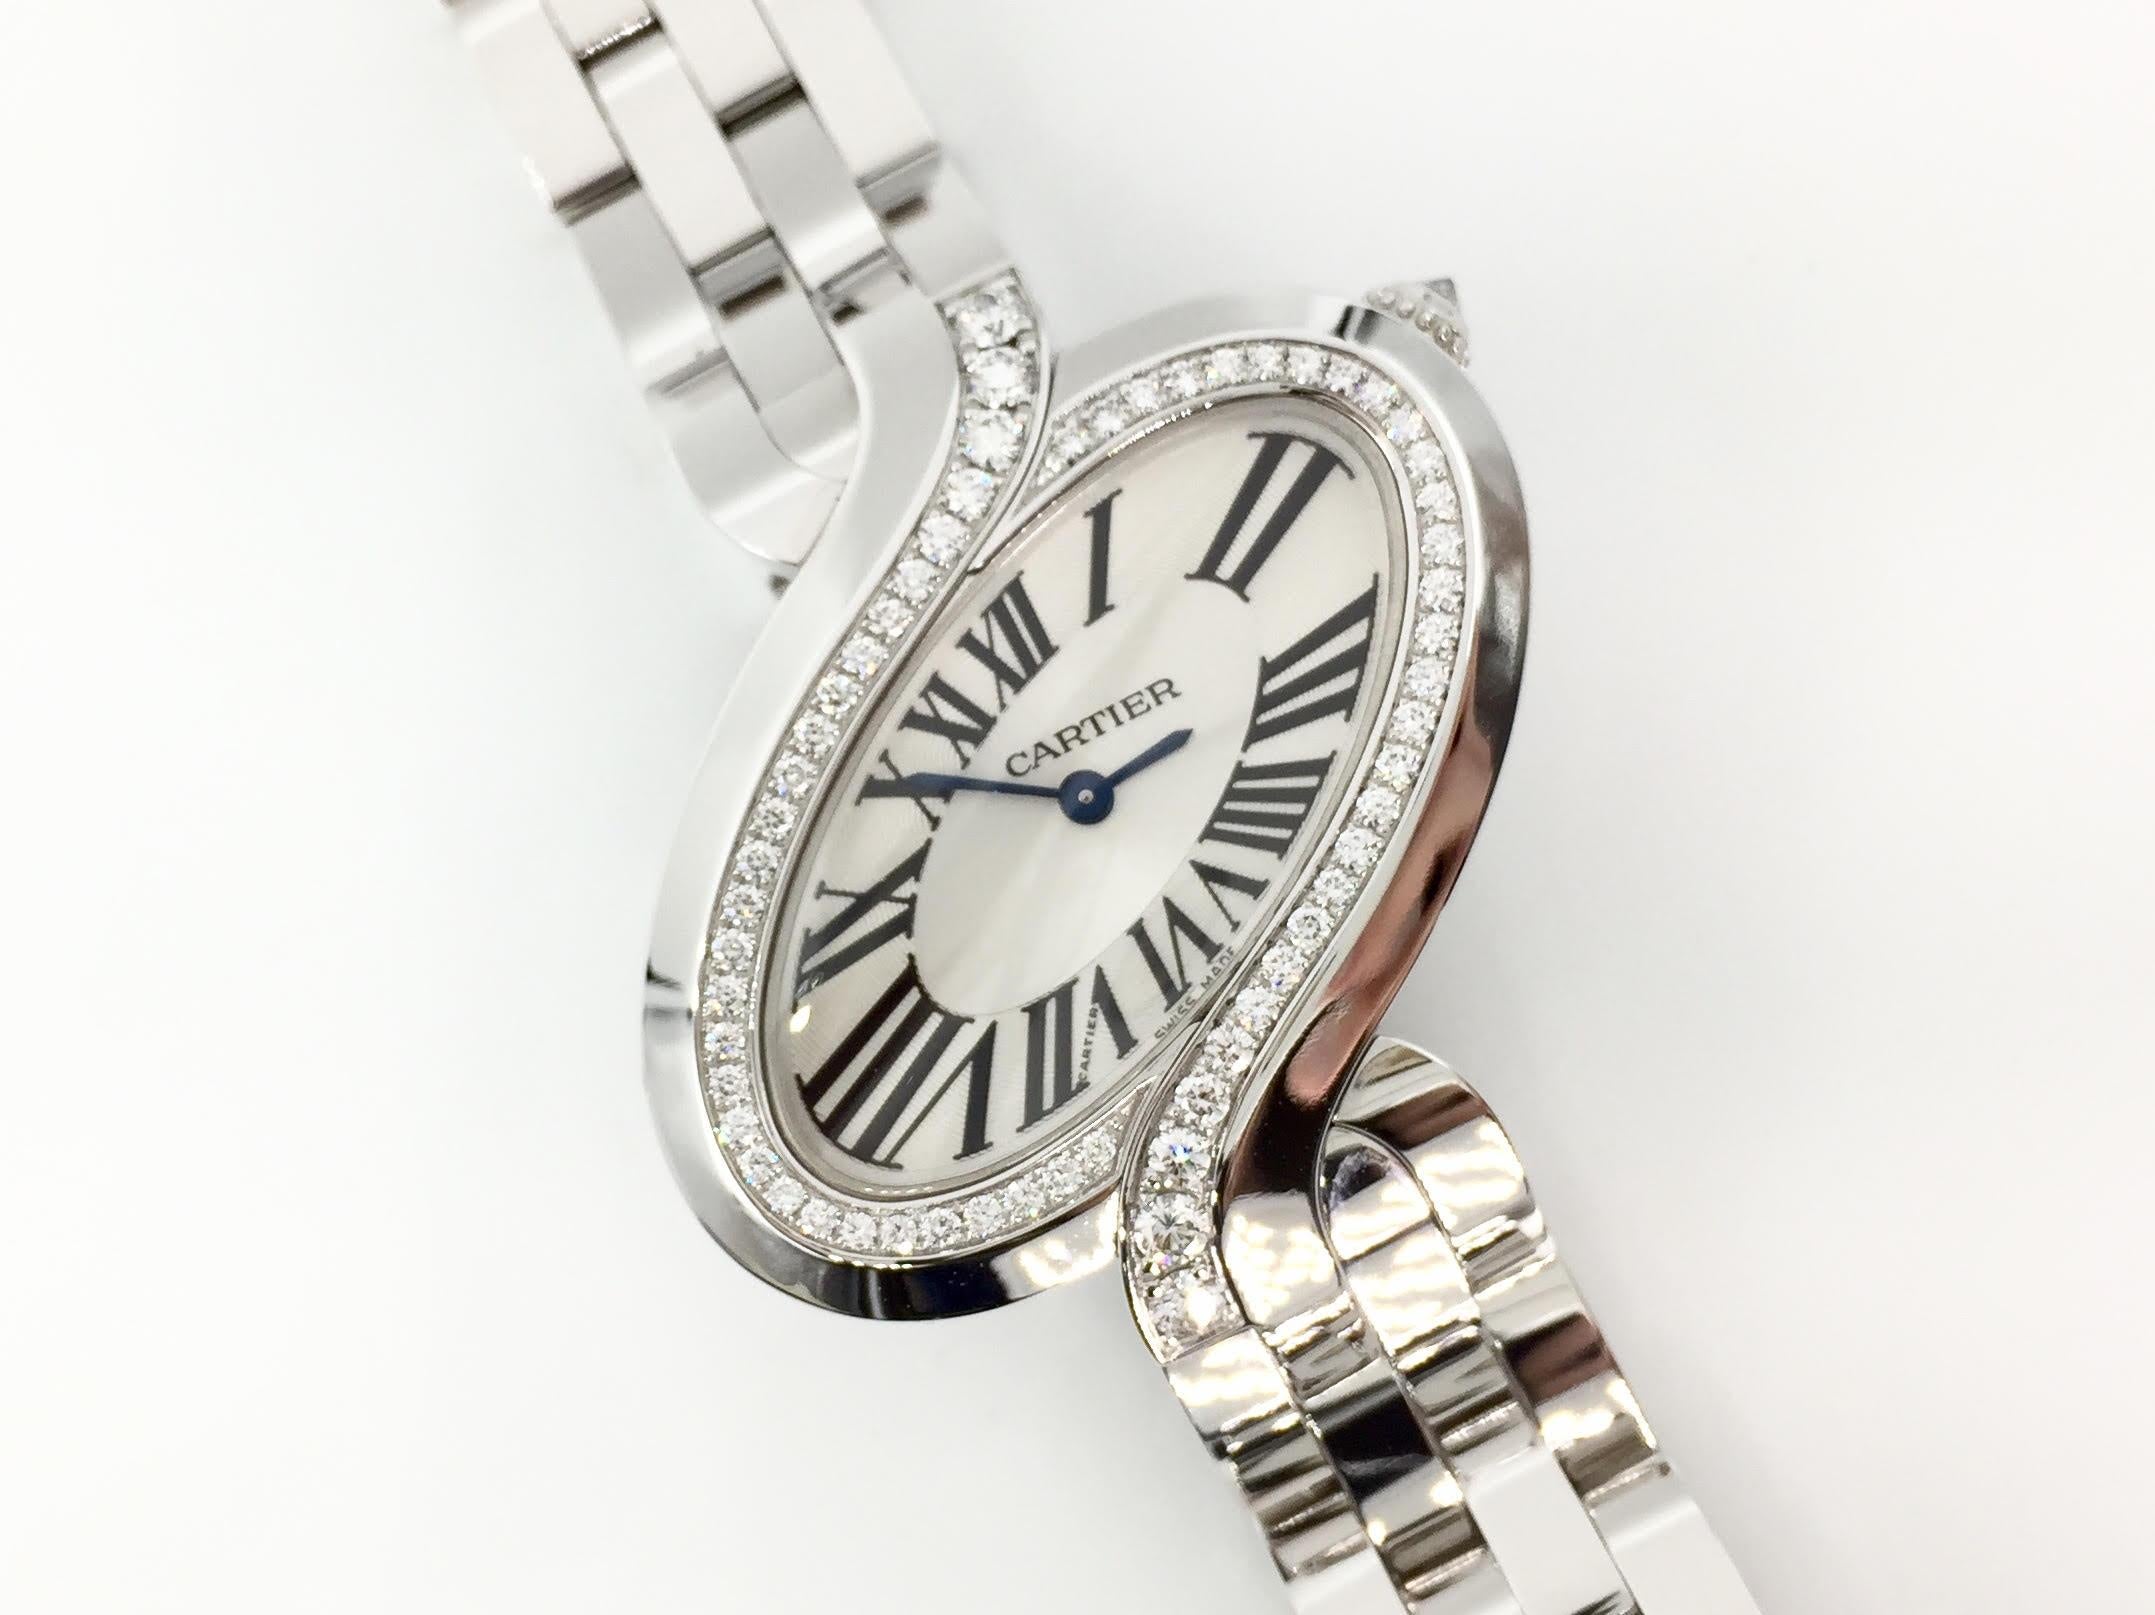 New with original tag still attached, boxes and all paperwork. Cartier Delices large quartz watch WG800007 in solid 18 karat white gold with beautiful diamond bezel. Size:43.81 x 38.39 mm
Original retail: $49,800
* Watch may have very minimal and